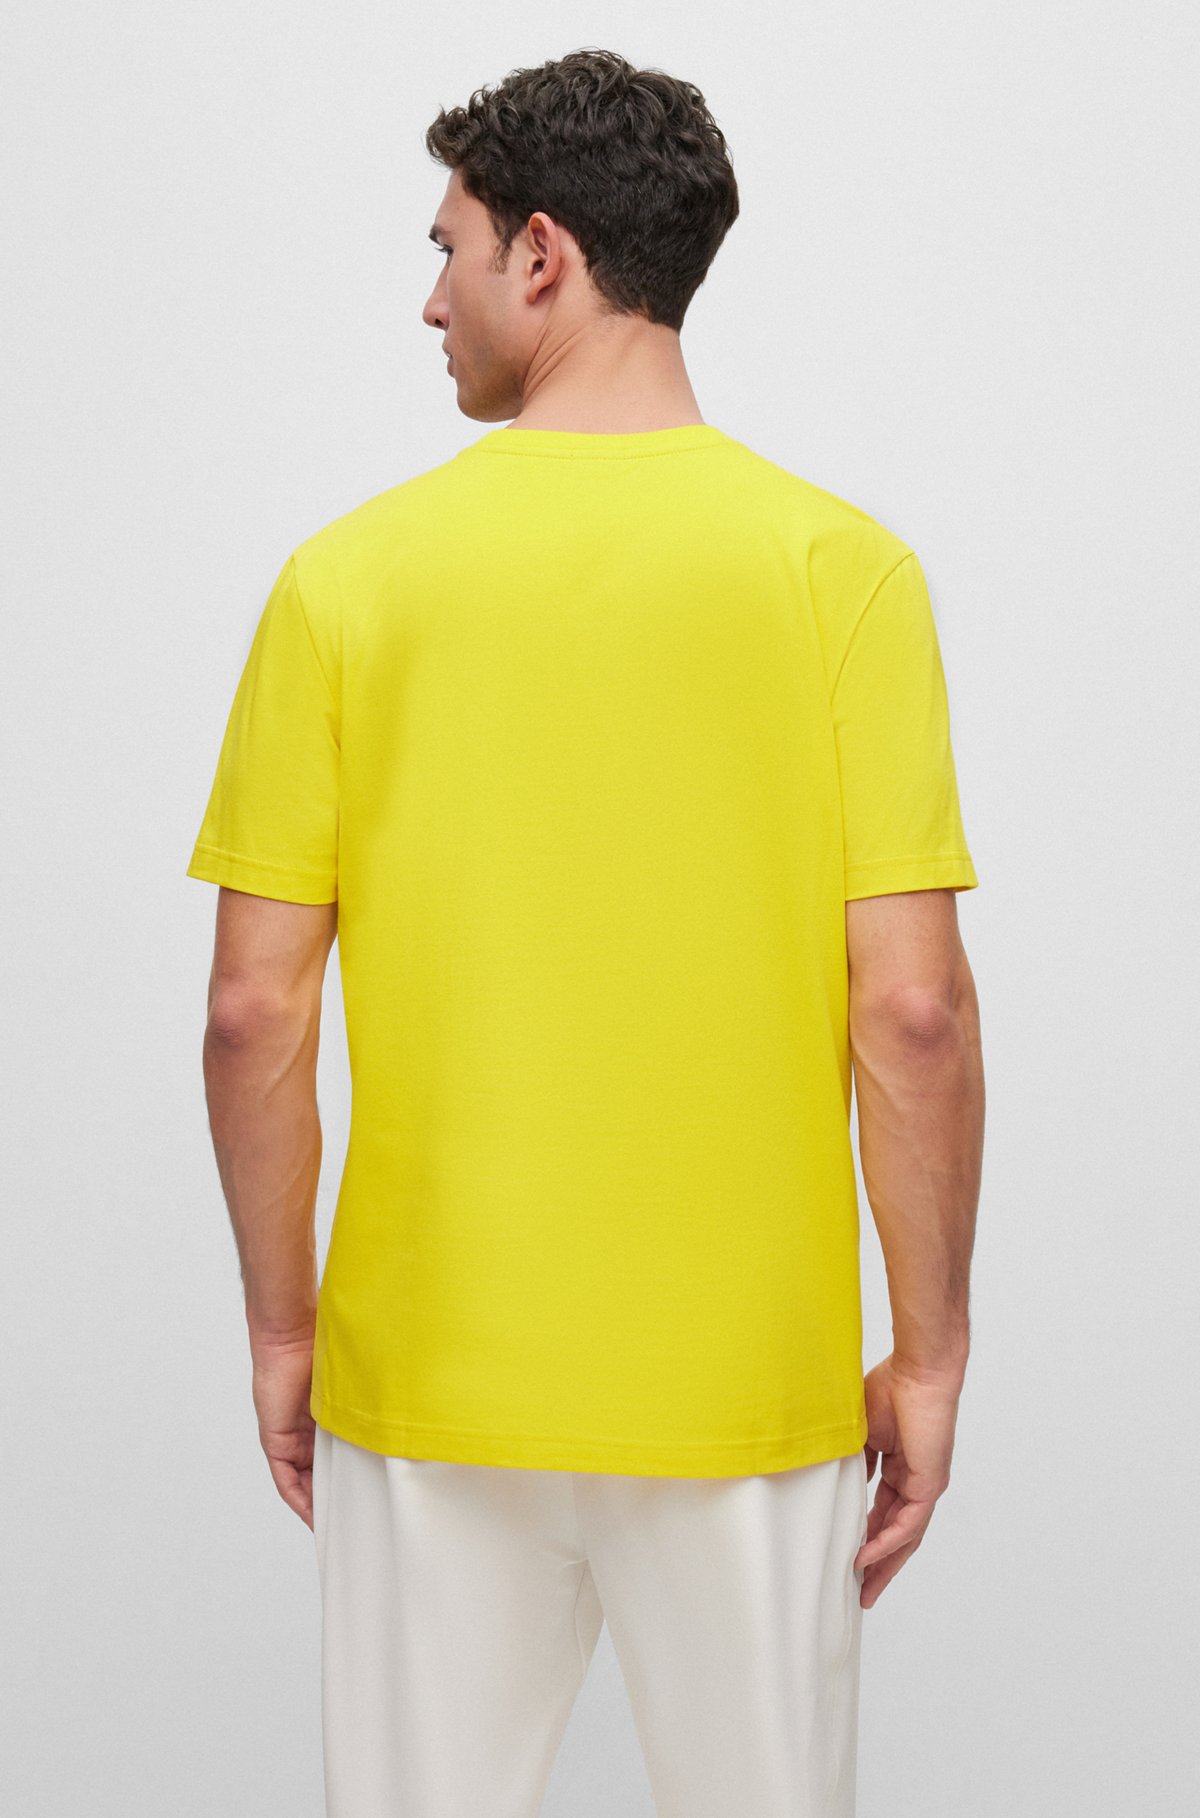 Regular-fit T-shirt in stretch cotton with side tape, Yellow